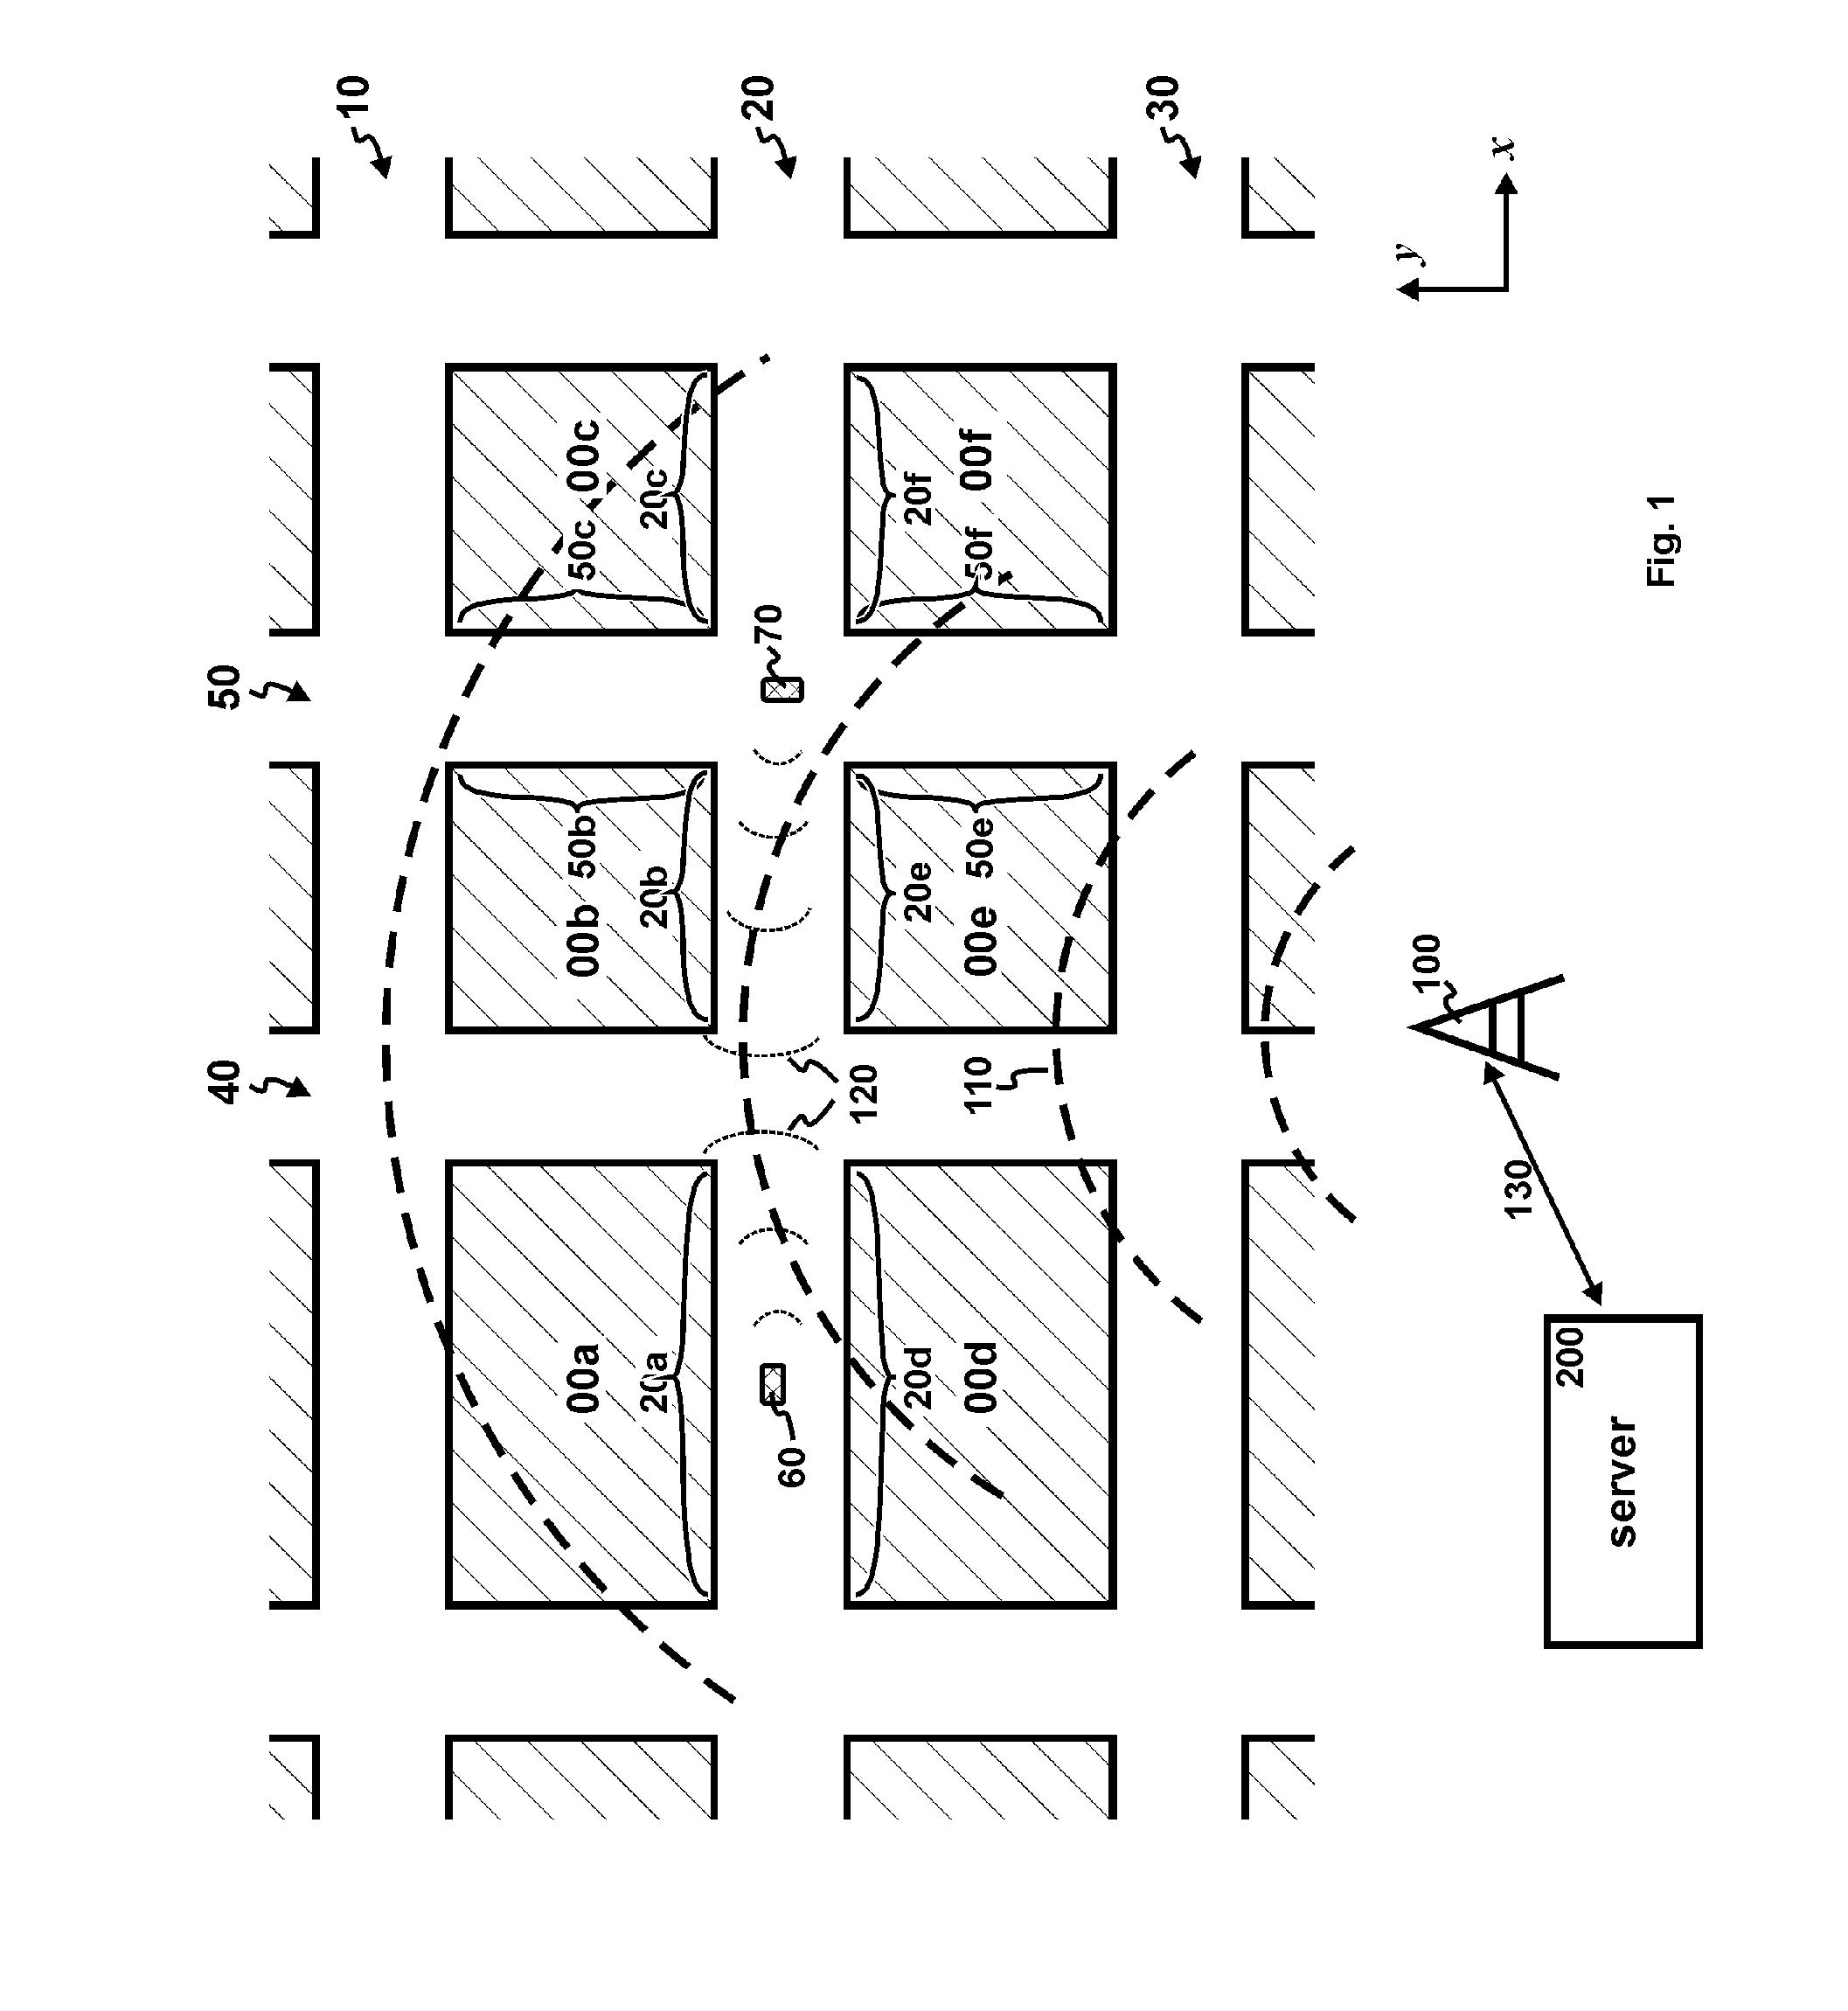 Large-area parking-monitoring system